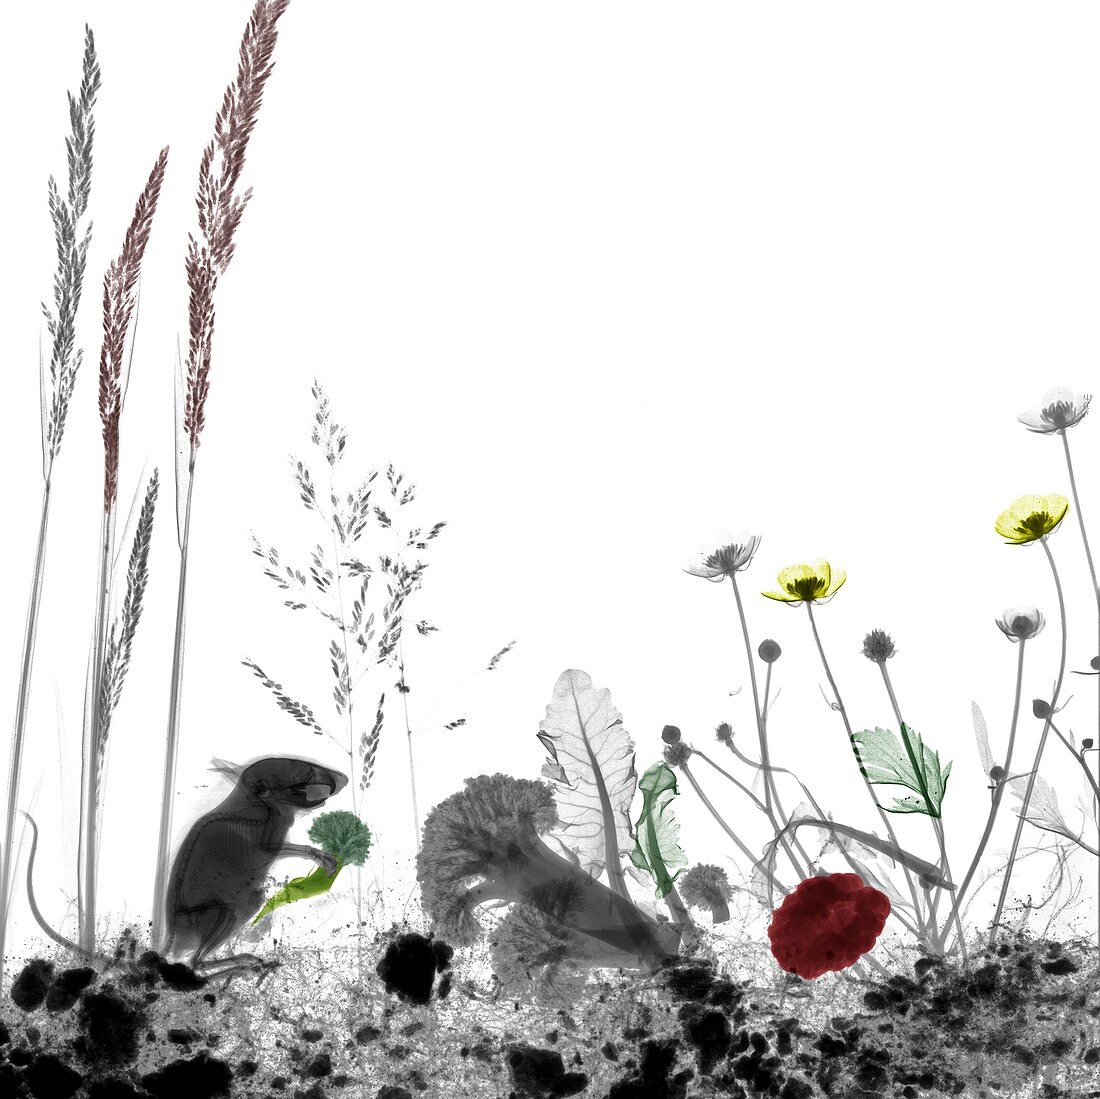 Mouse and garden plants, X-ray